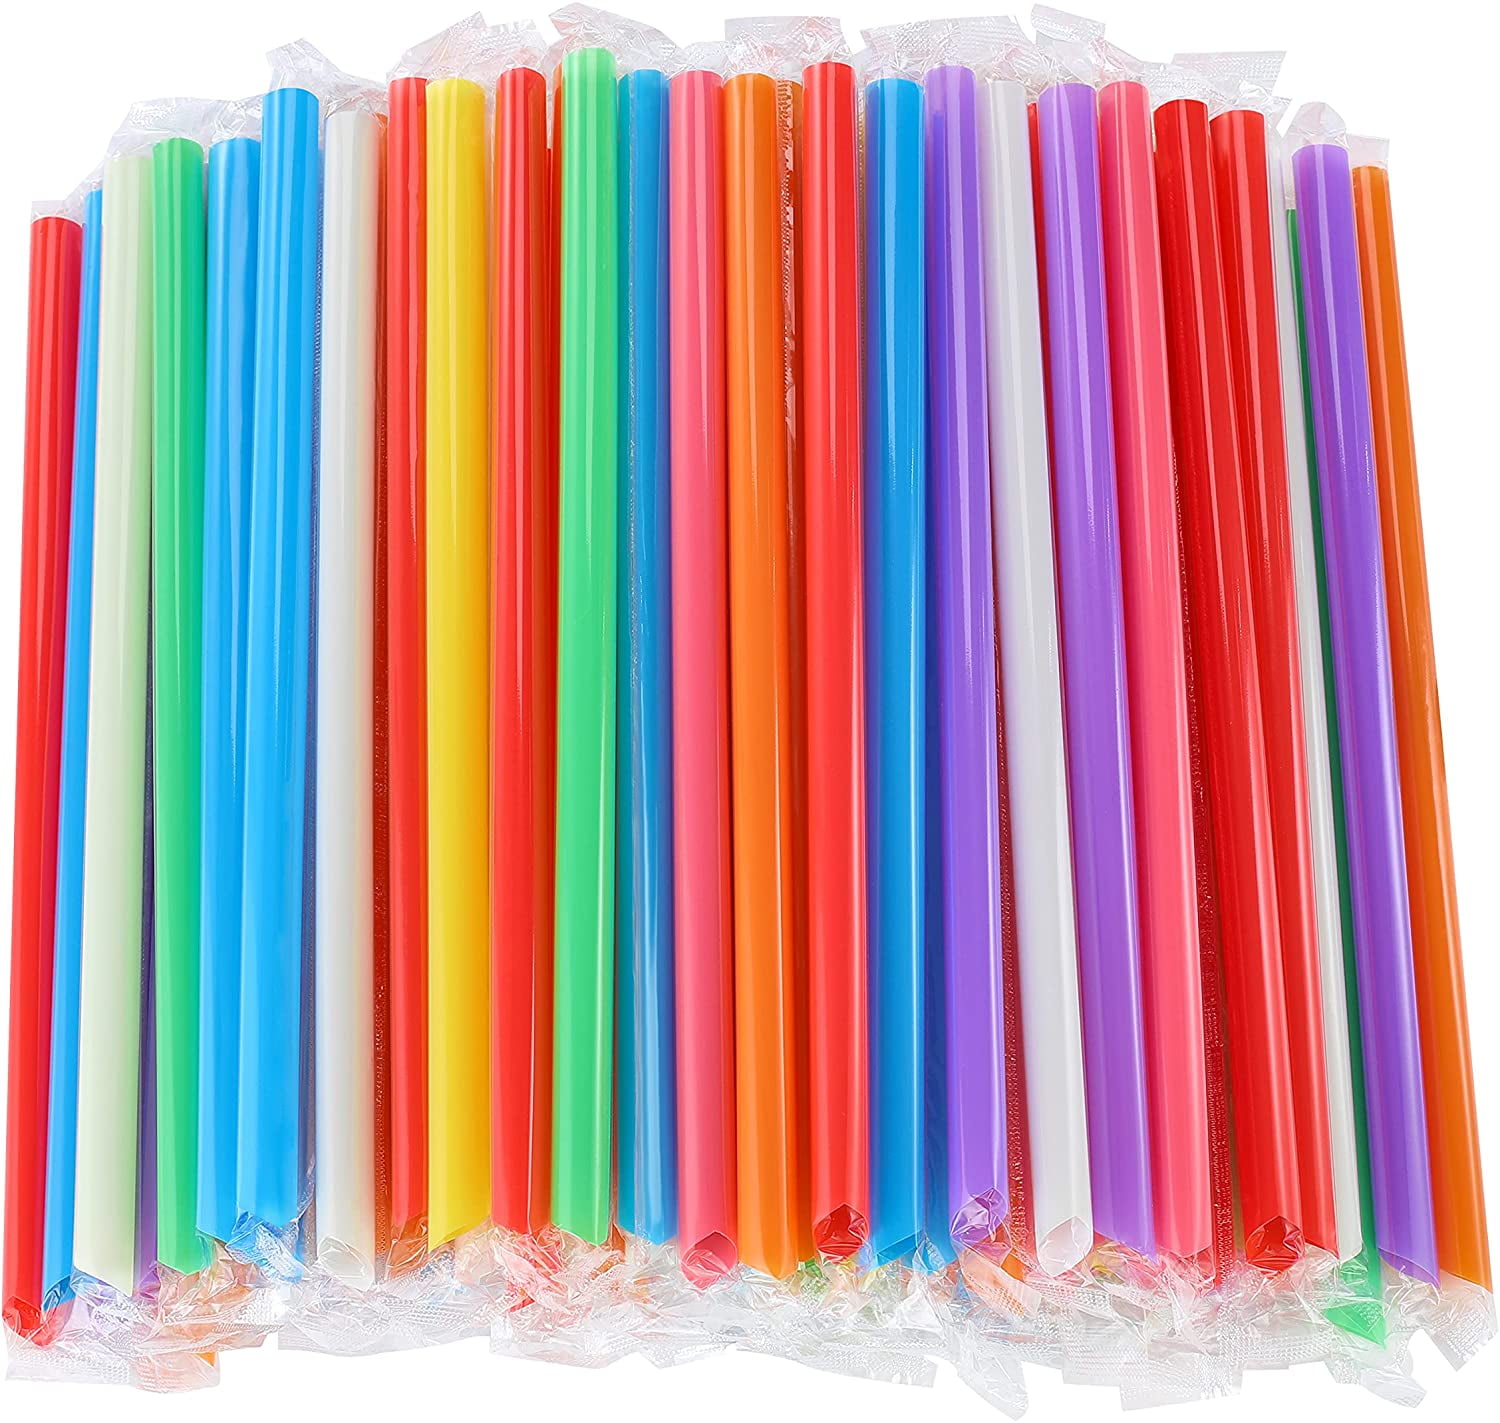 Details about   10" Extra Long Neon Plastic Bendy Drinking Straw Flexible Party Juice Drink 26cm